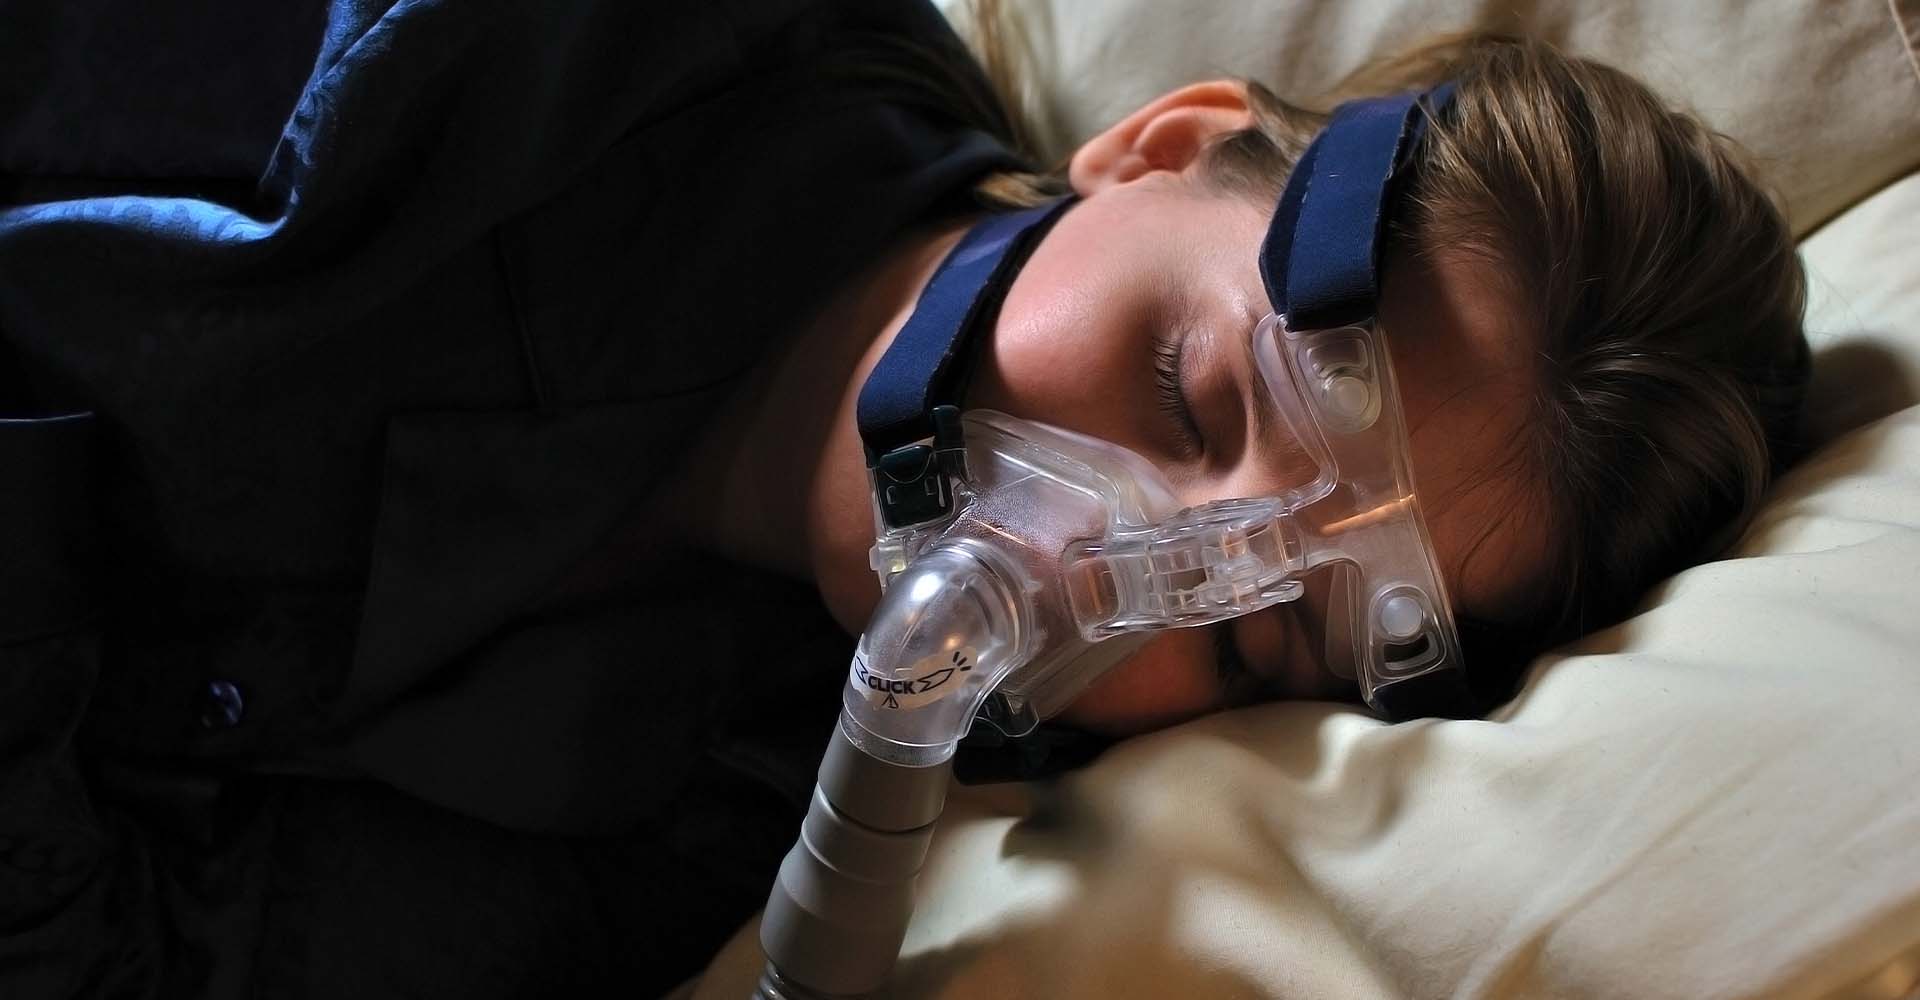 Man sleeping with cpap mask